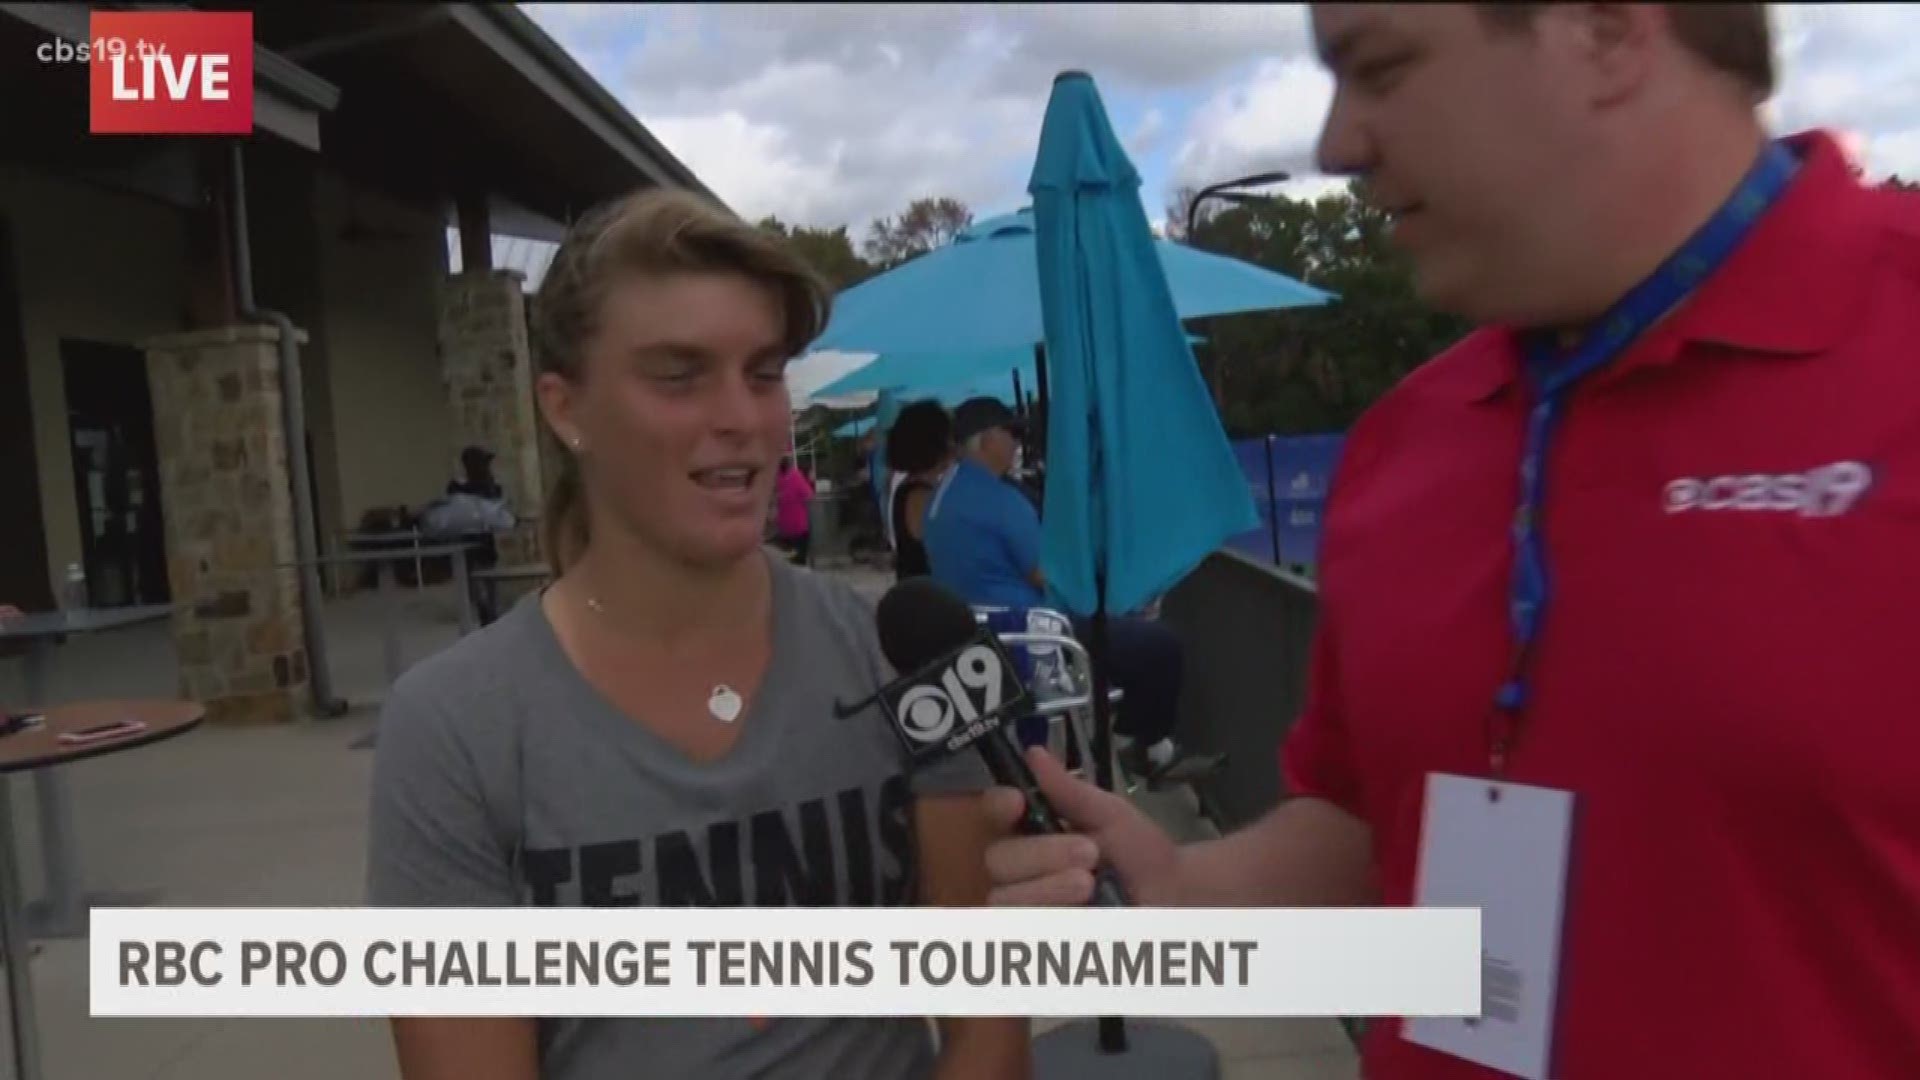 Meteorologist Michael Behrens Interviews Bianca Turati Tuesday during the Noon Show at the RBC Pro Challenge Tennis Tournament.